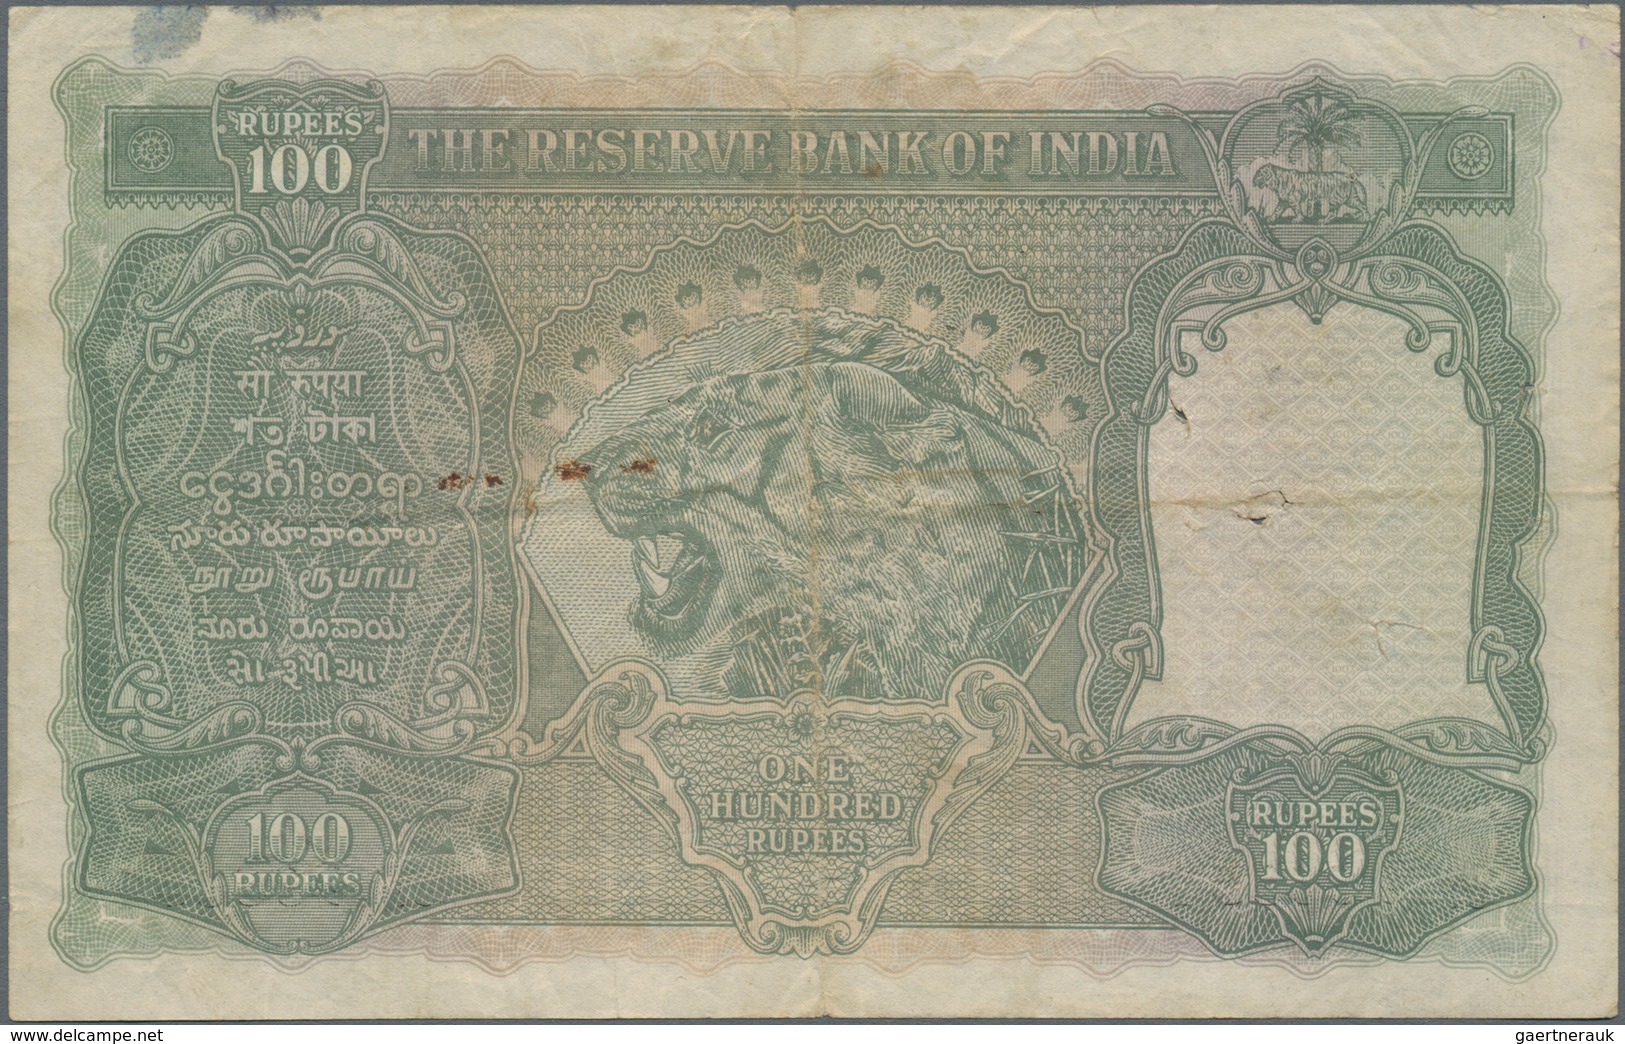 India / Indien: 100 Rupees ND(1937) Portrait KGIV P. 20, LAHORE Issue, Used With Folds And Pinholes - India